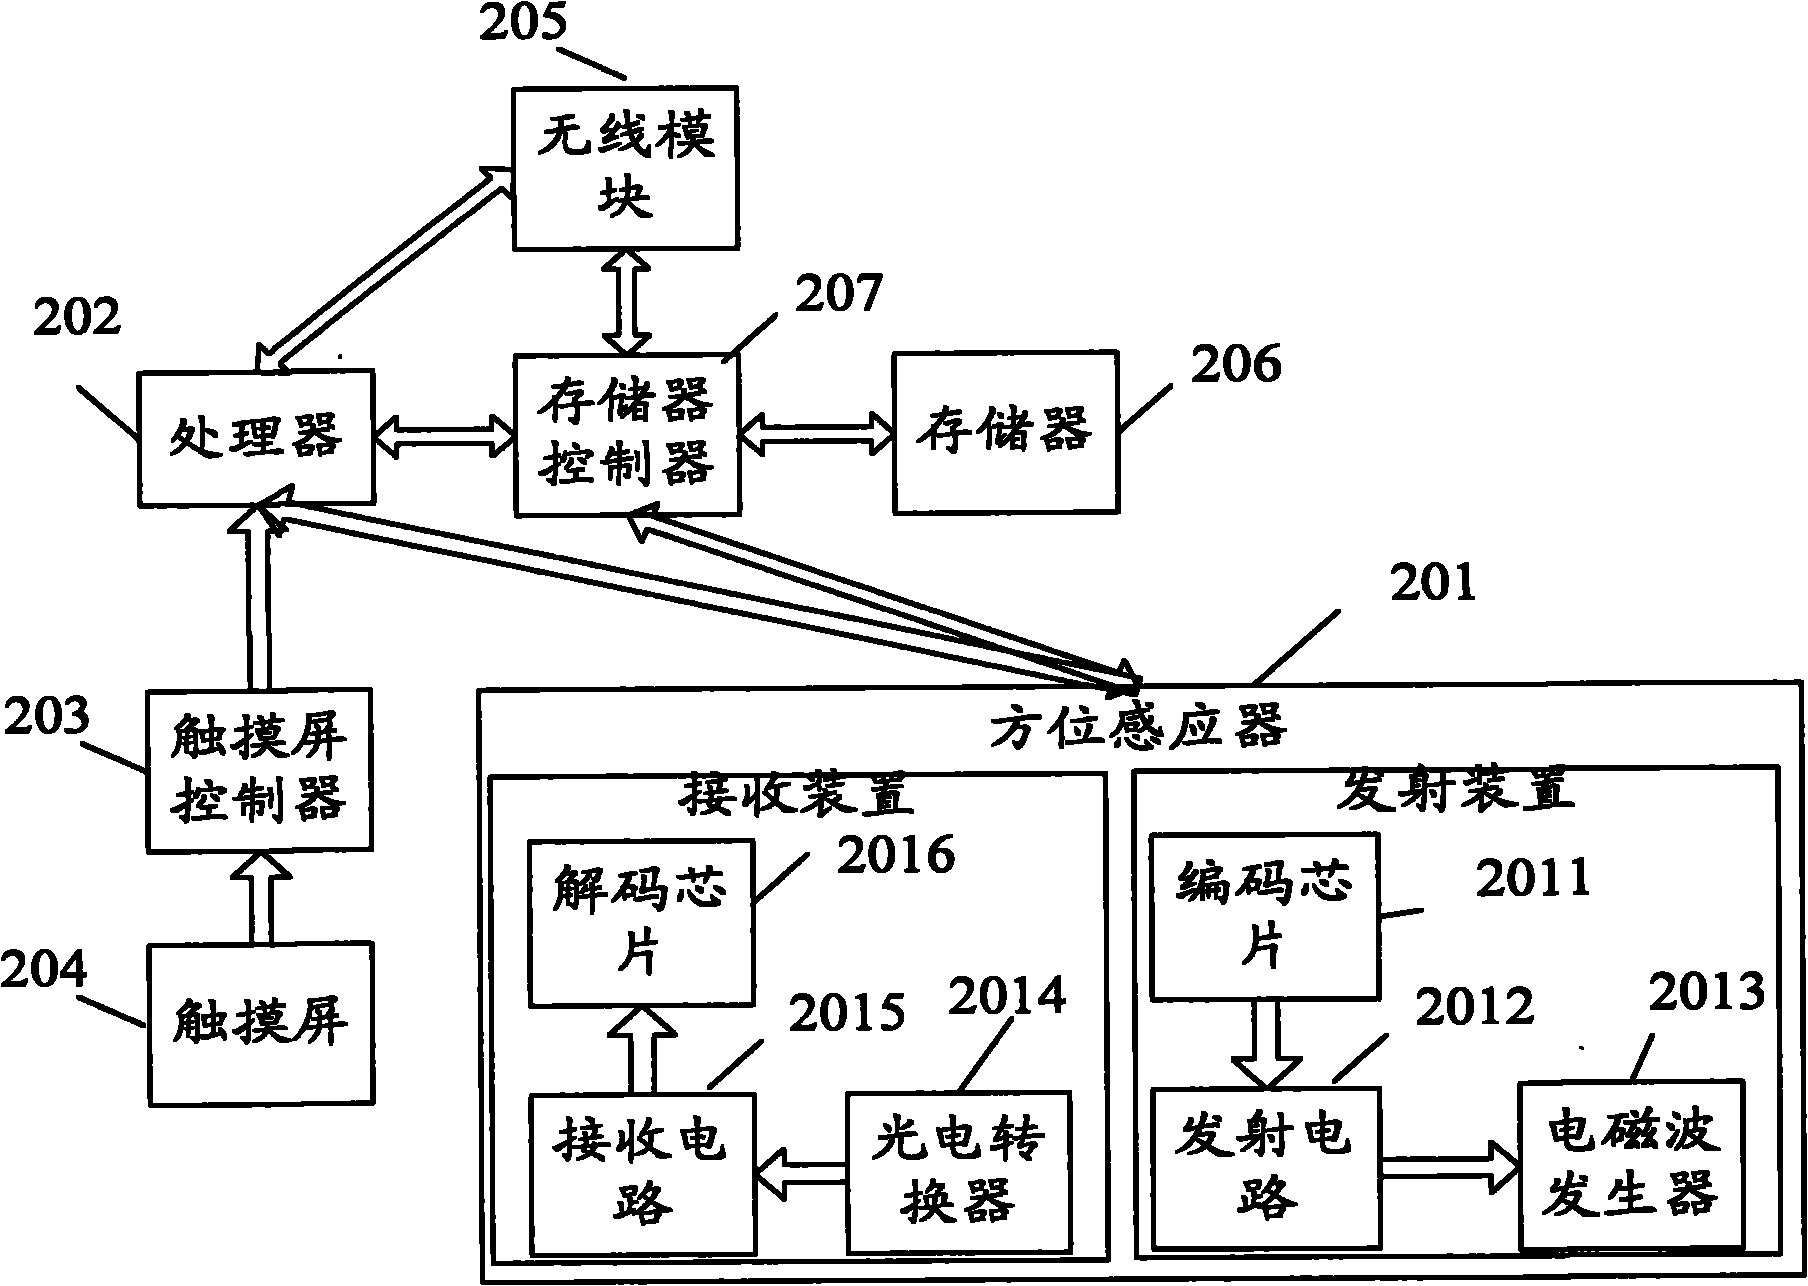 Apparatus, equipment and method for transmitting data in touch mode